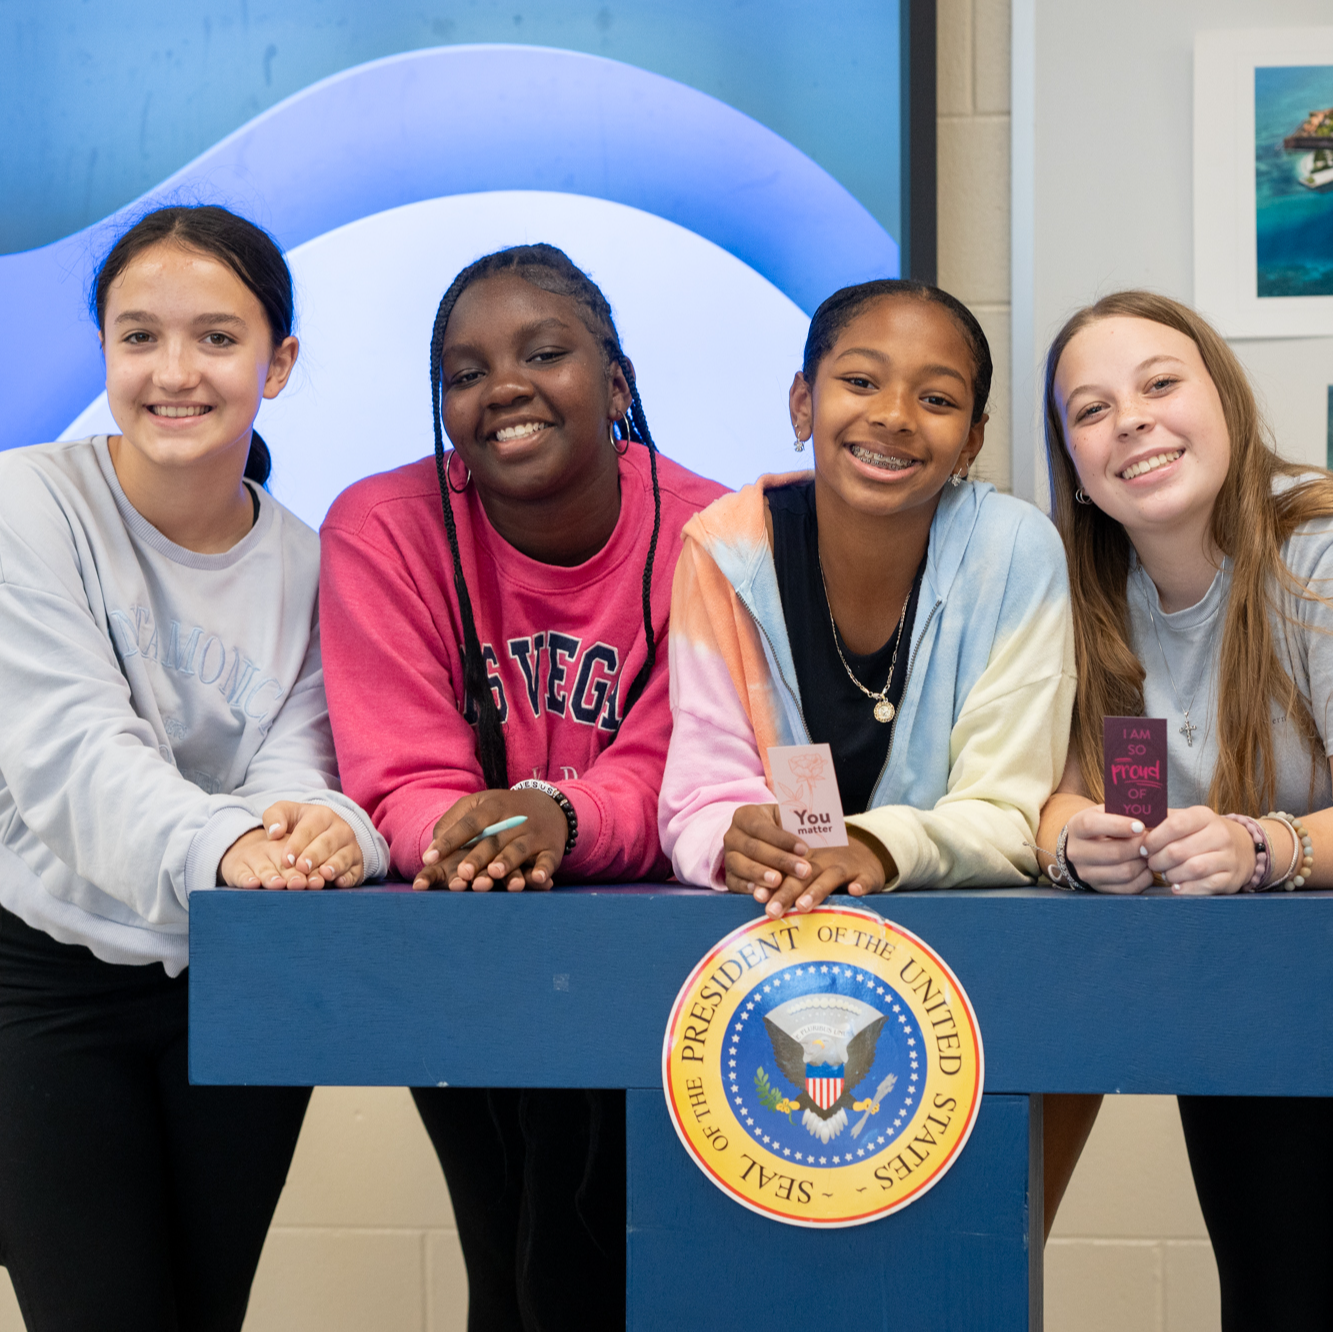 4 Speech and Debate students standing behind a President of The United States Podium